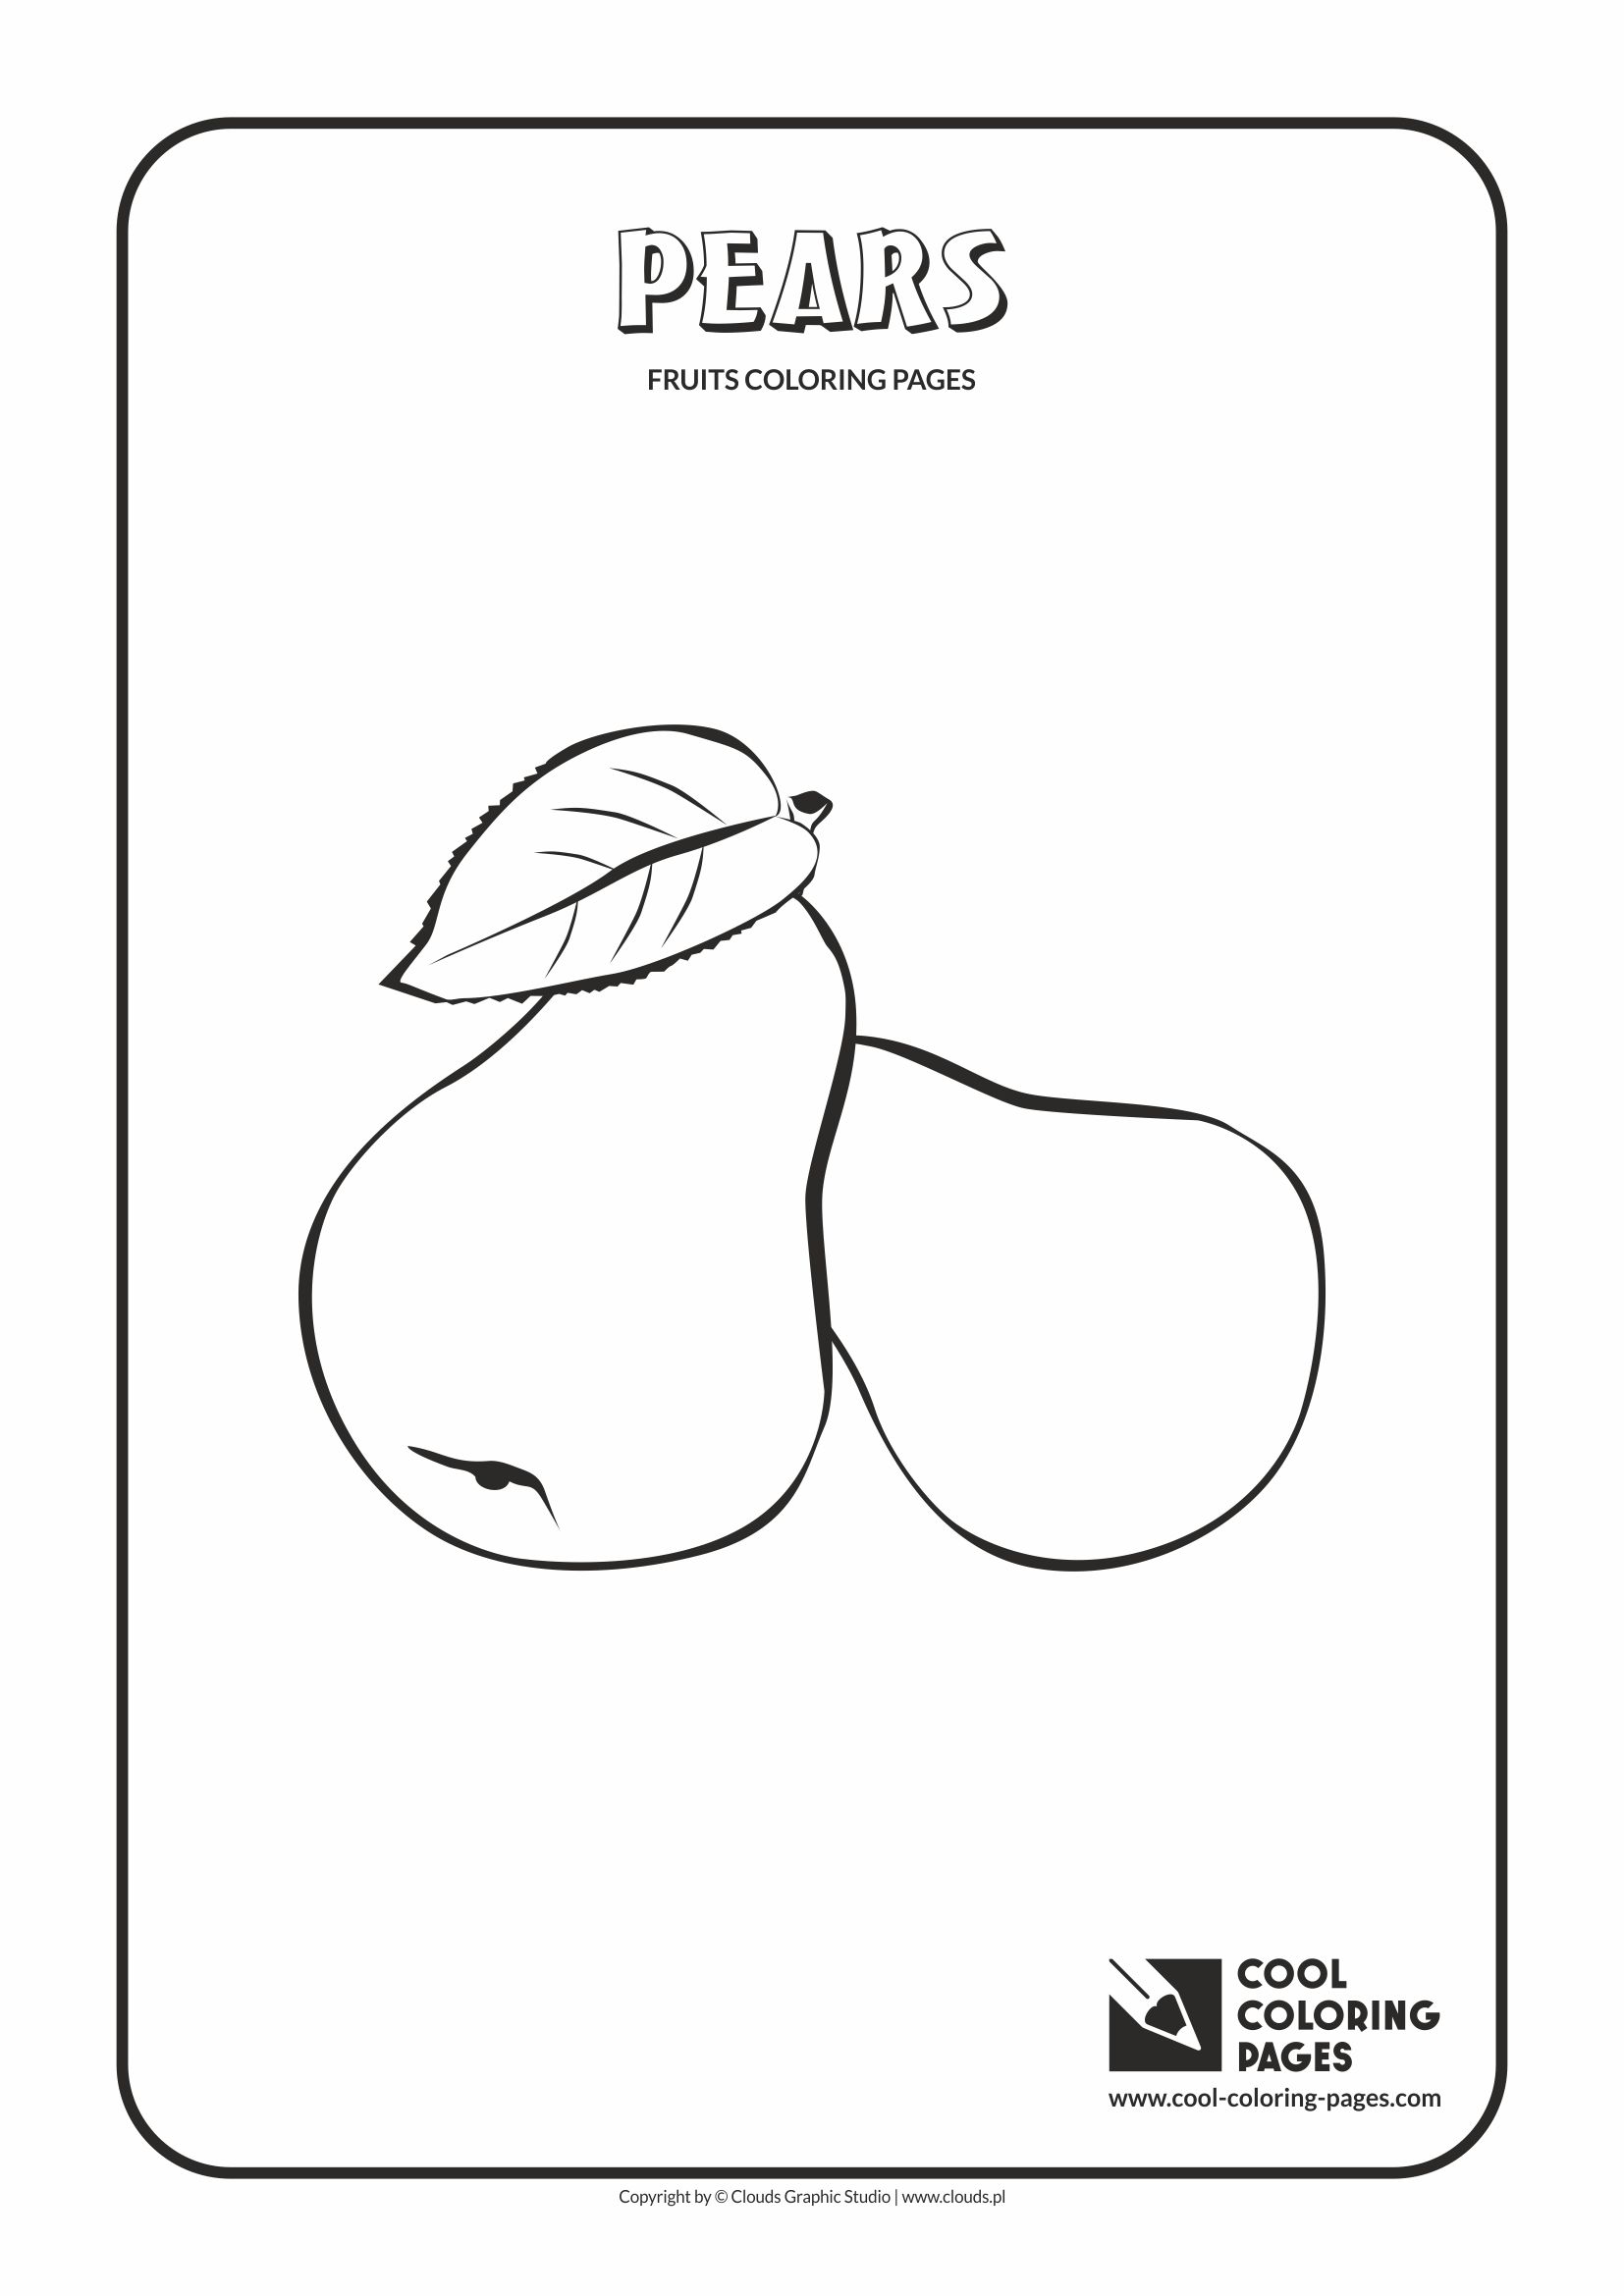 Cool Coloring Pages - Plants / Pears / Coloring page with pears